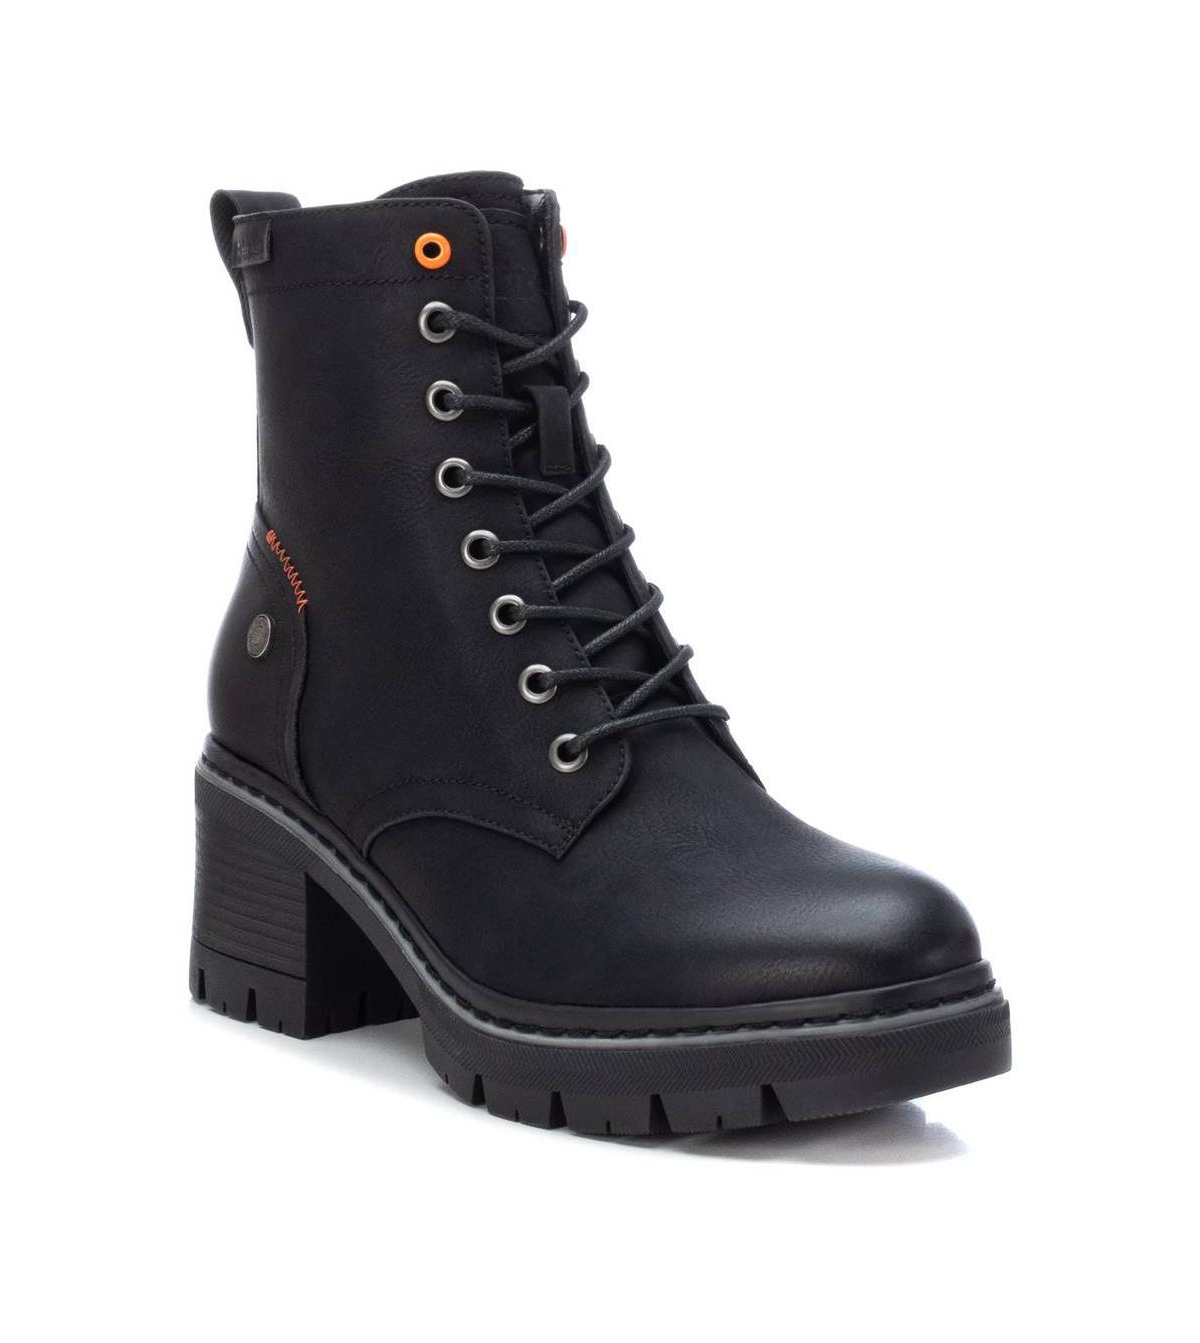 Women's Lace-Up Boots By Xti - Ice